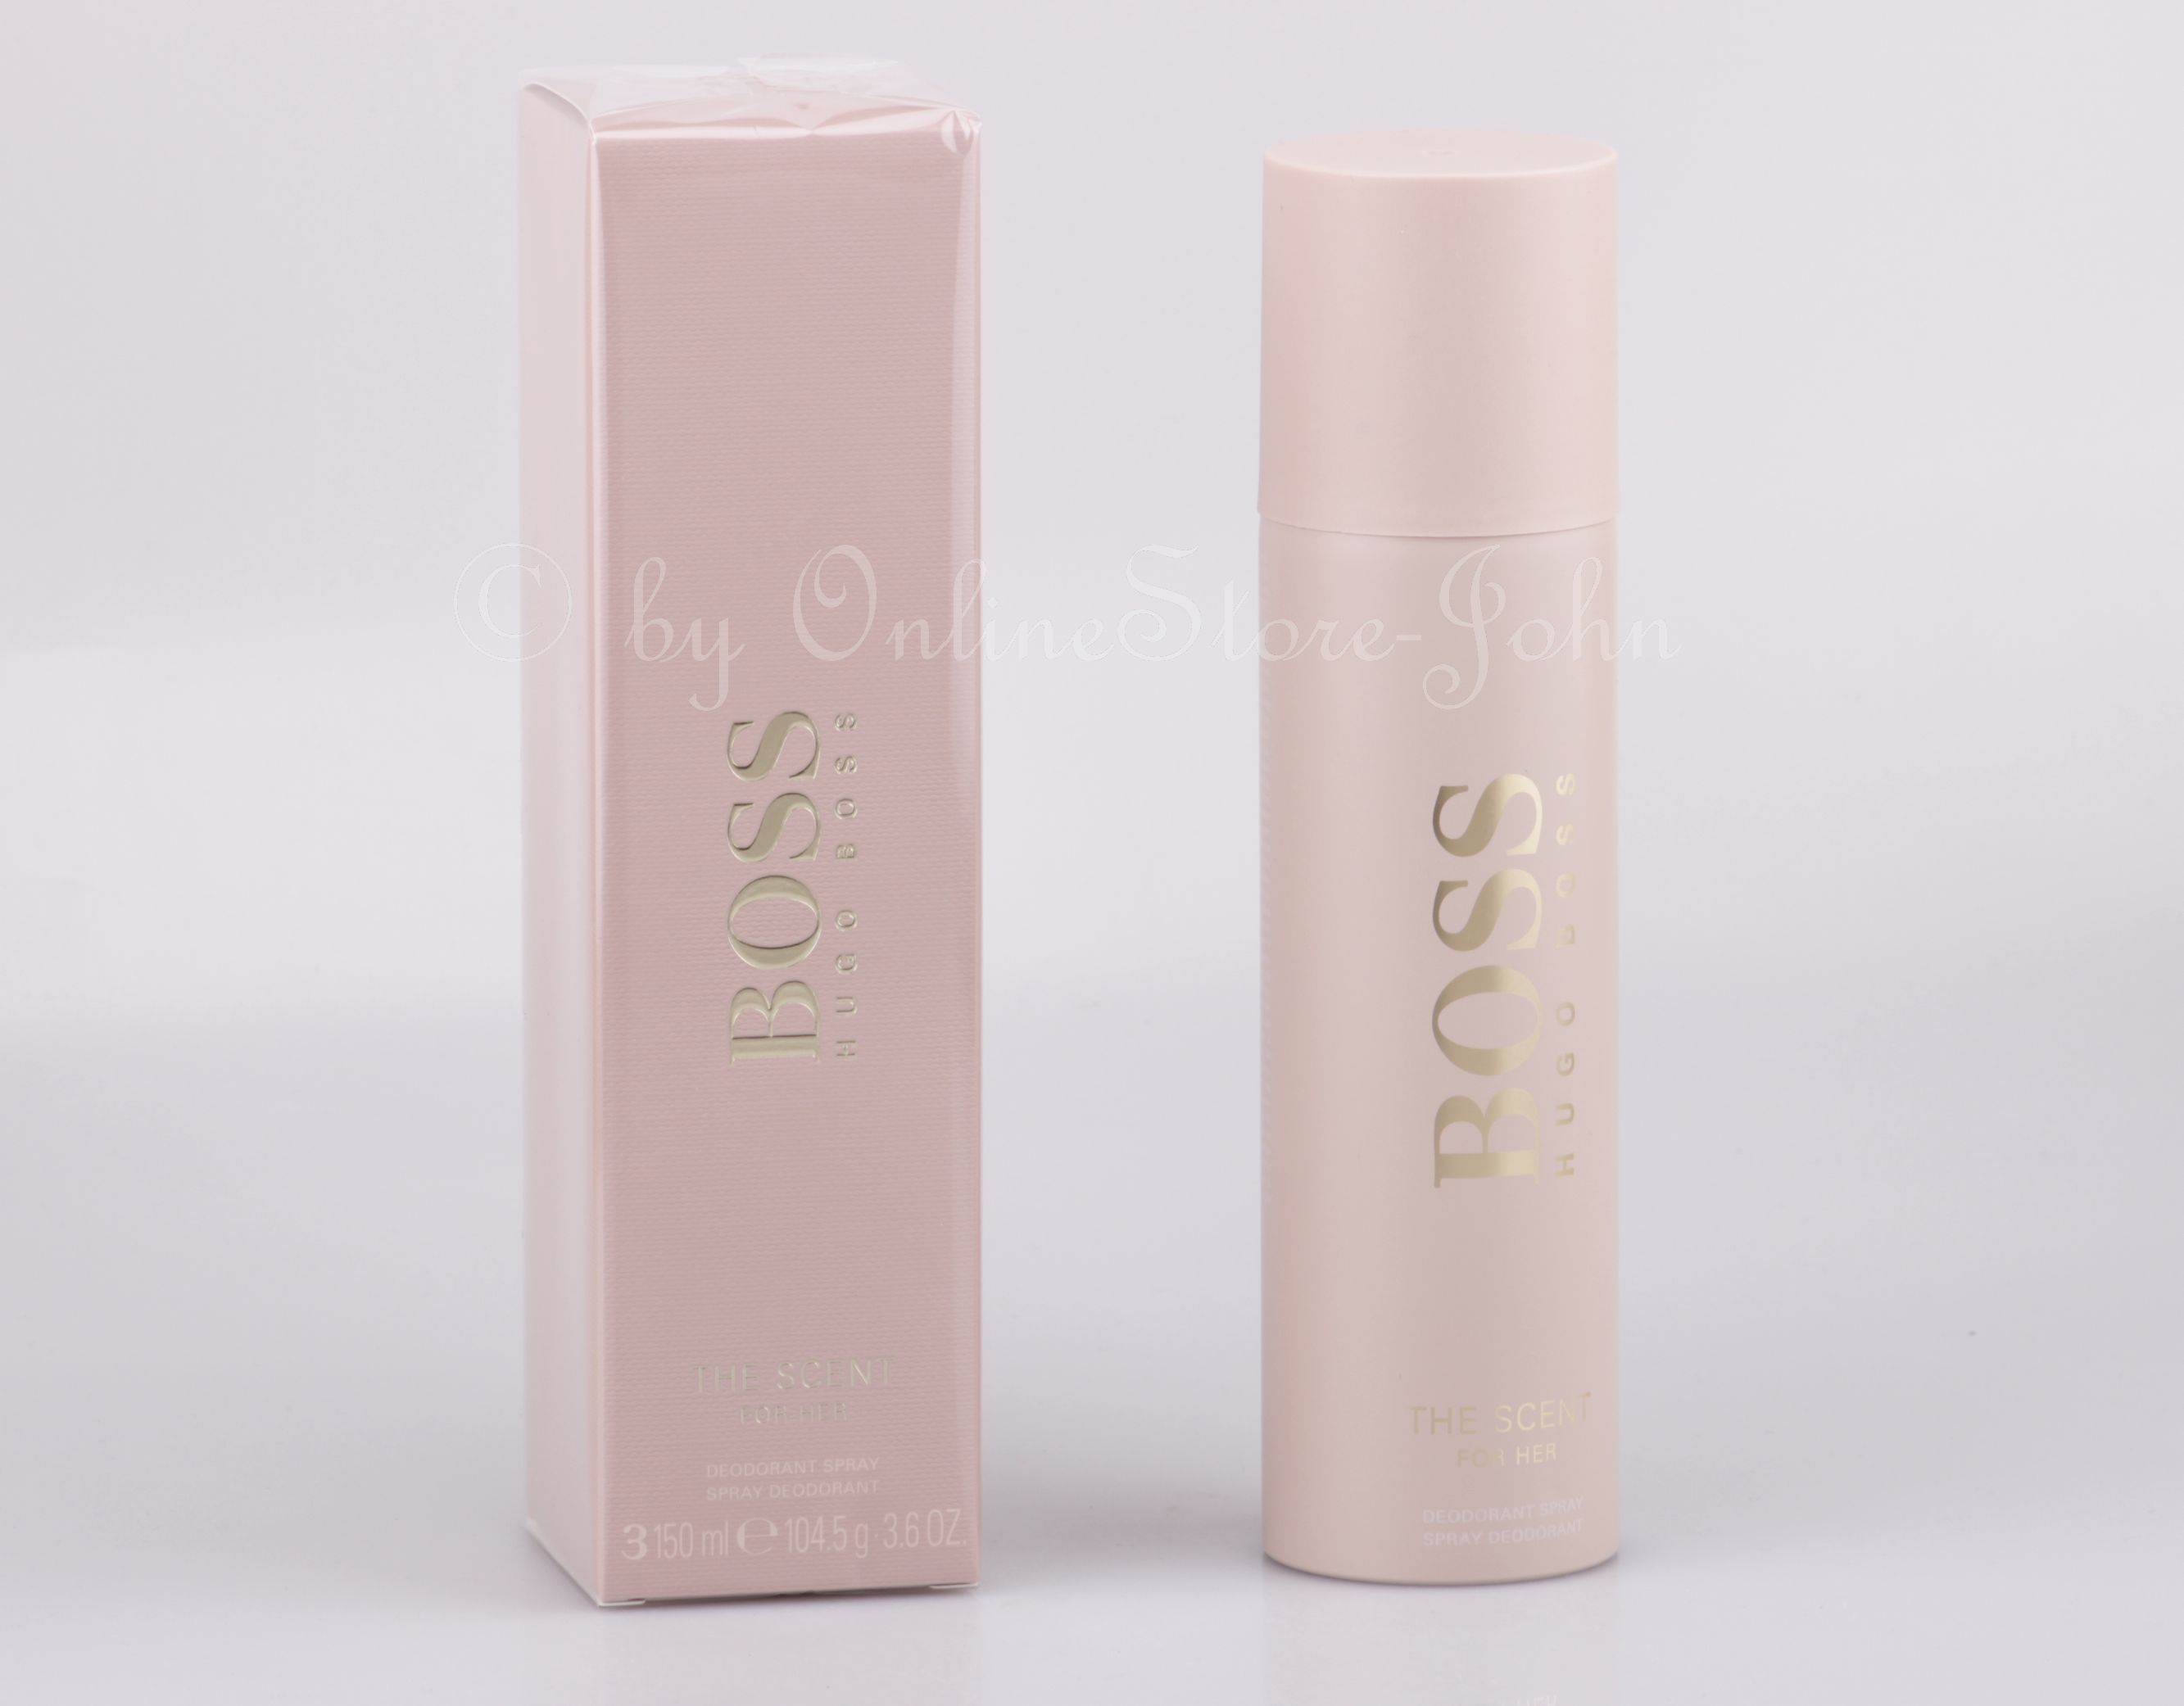 boss the scent for her deo